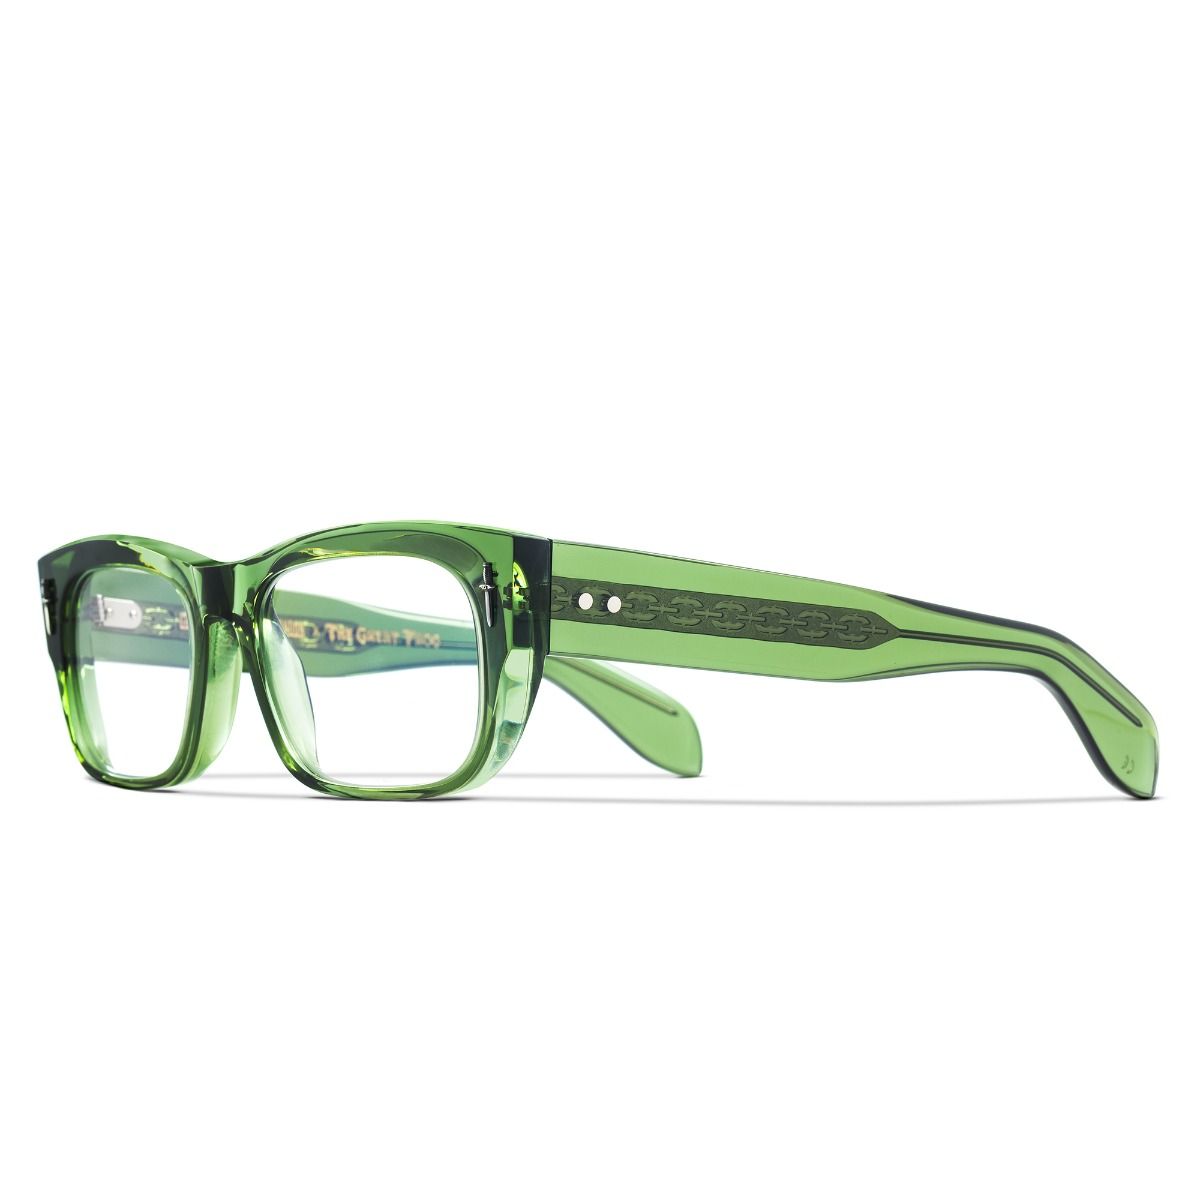 The Great Frog Dagger Square Glasses-Leaf Green